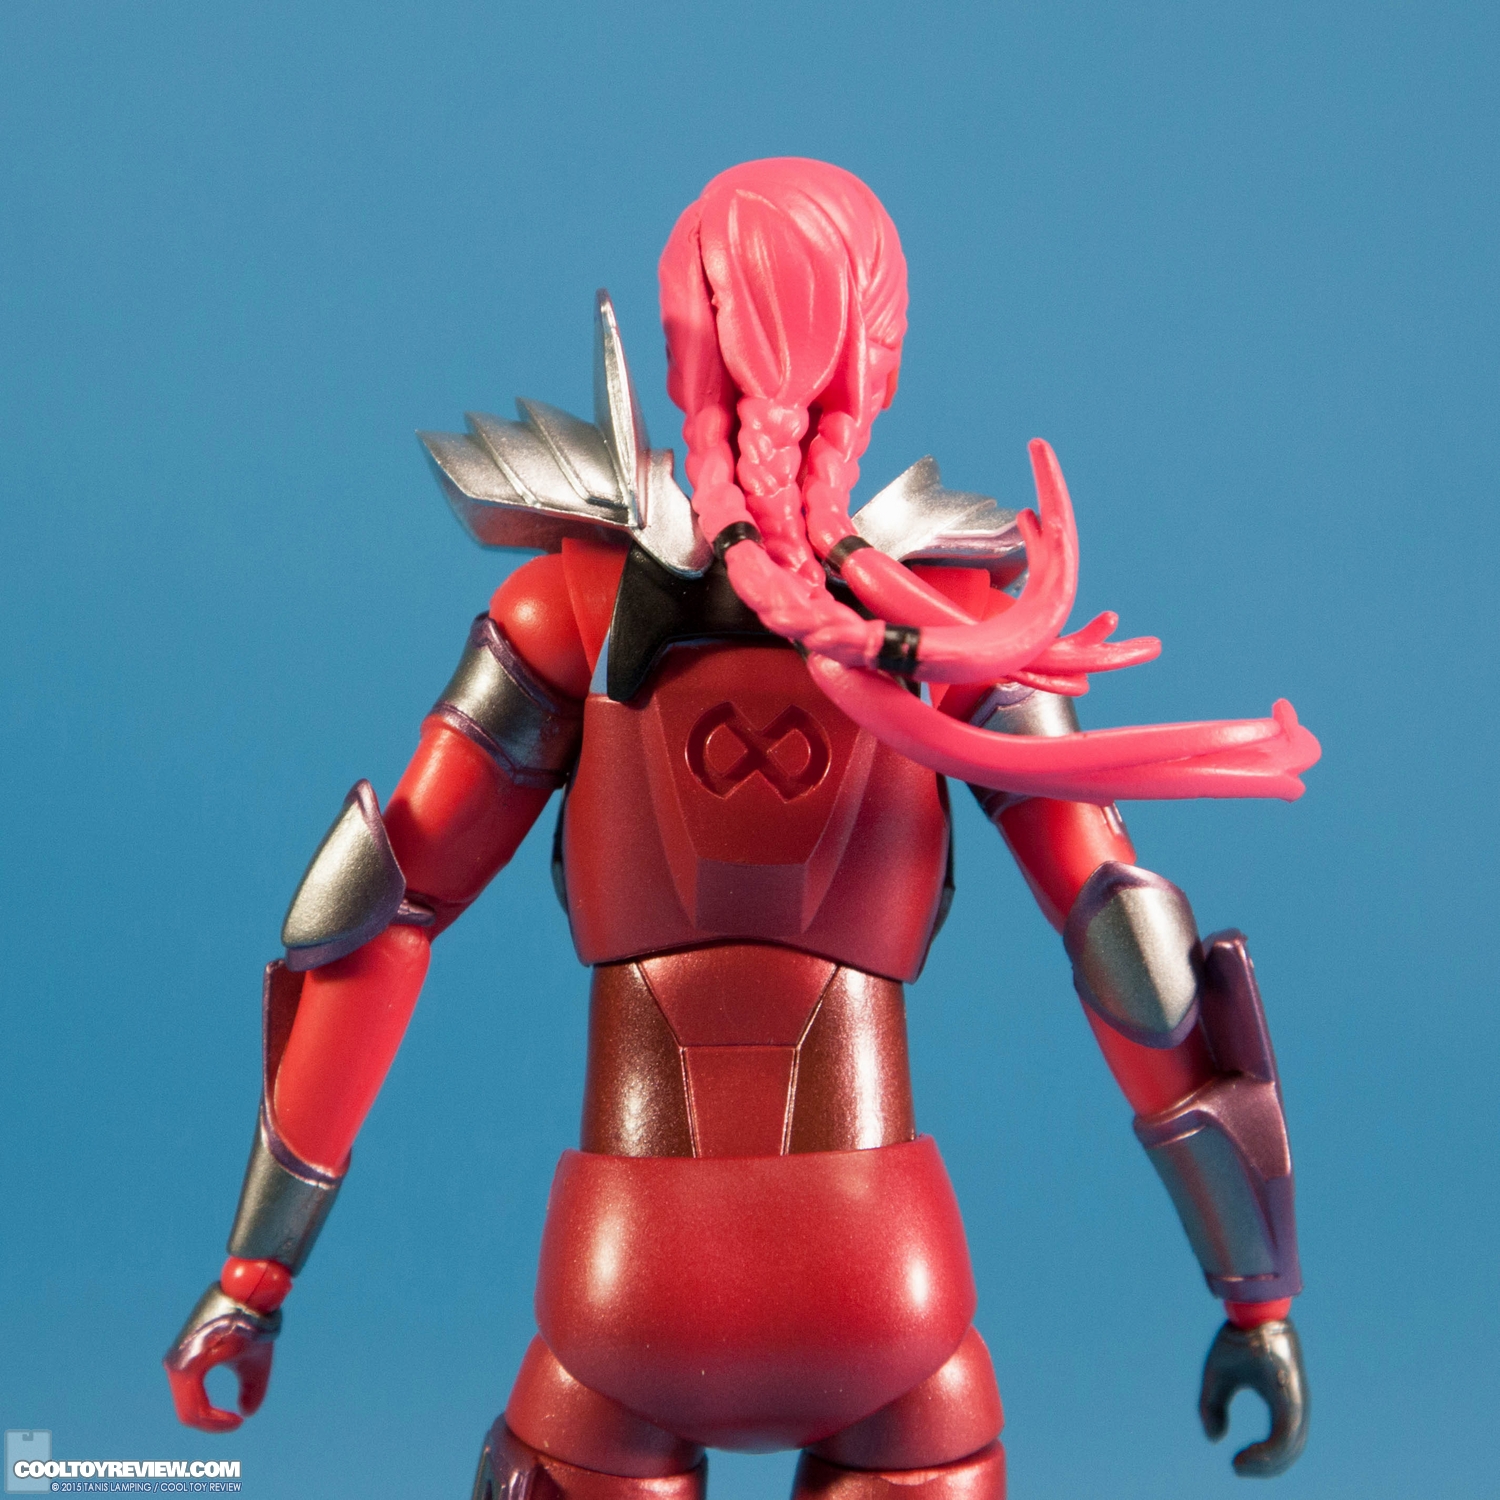 courage-core-power-series-6-5-inch-action-figure-by-i-am-elemental-008.jpg